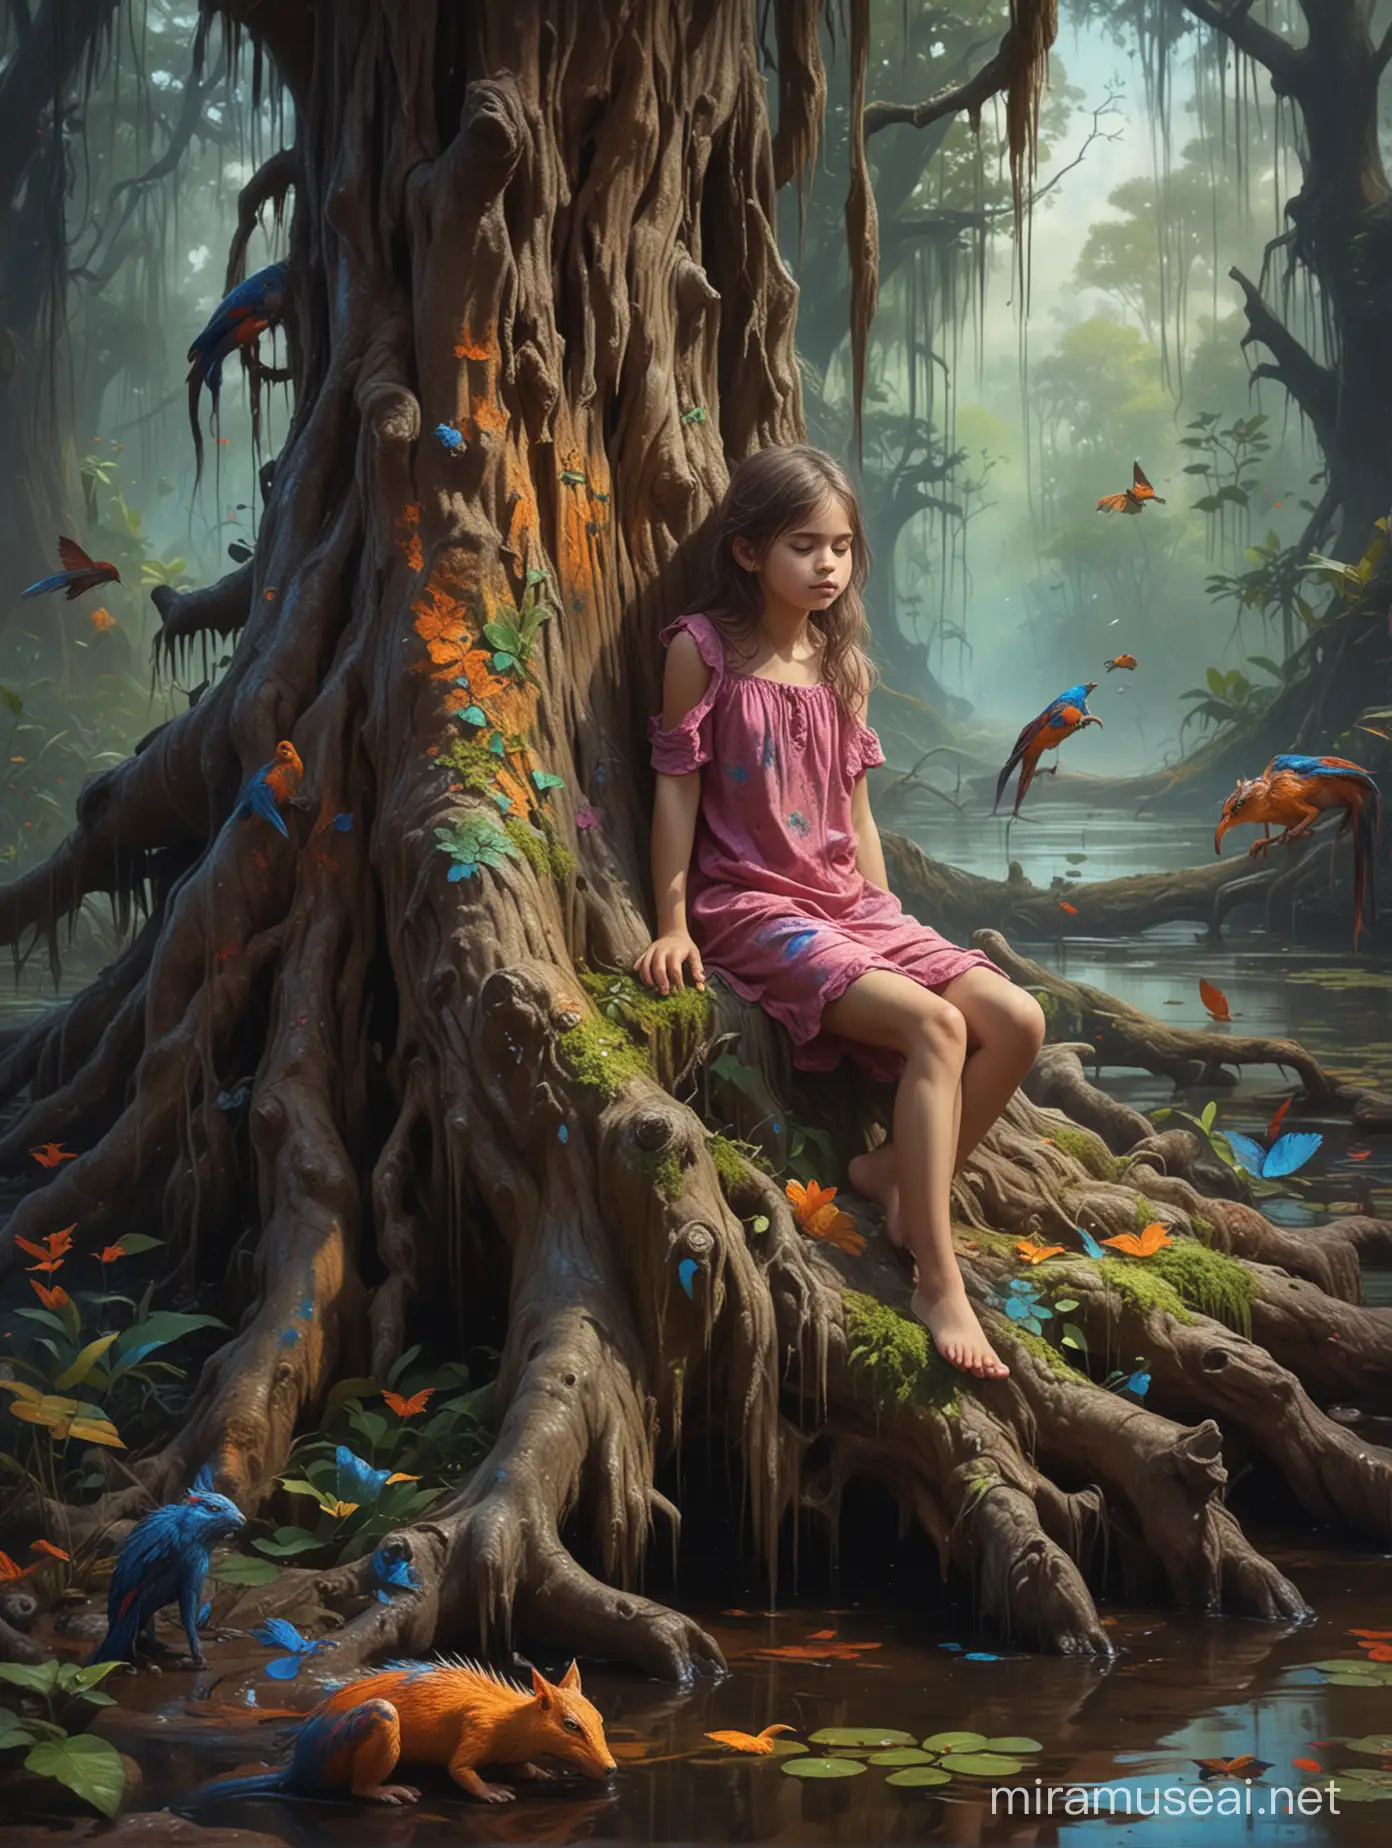 Sleeping Jungle Daughter Vivid Portrait in New Classic Oil Painting Style